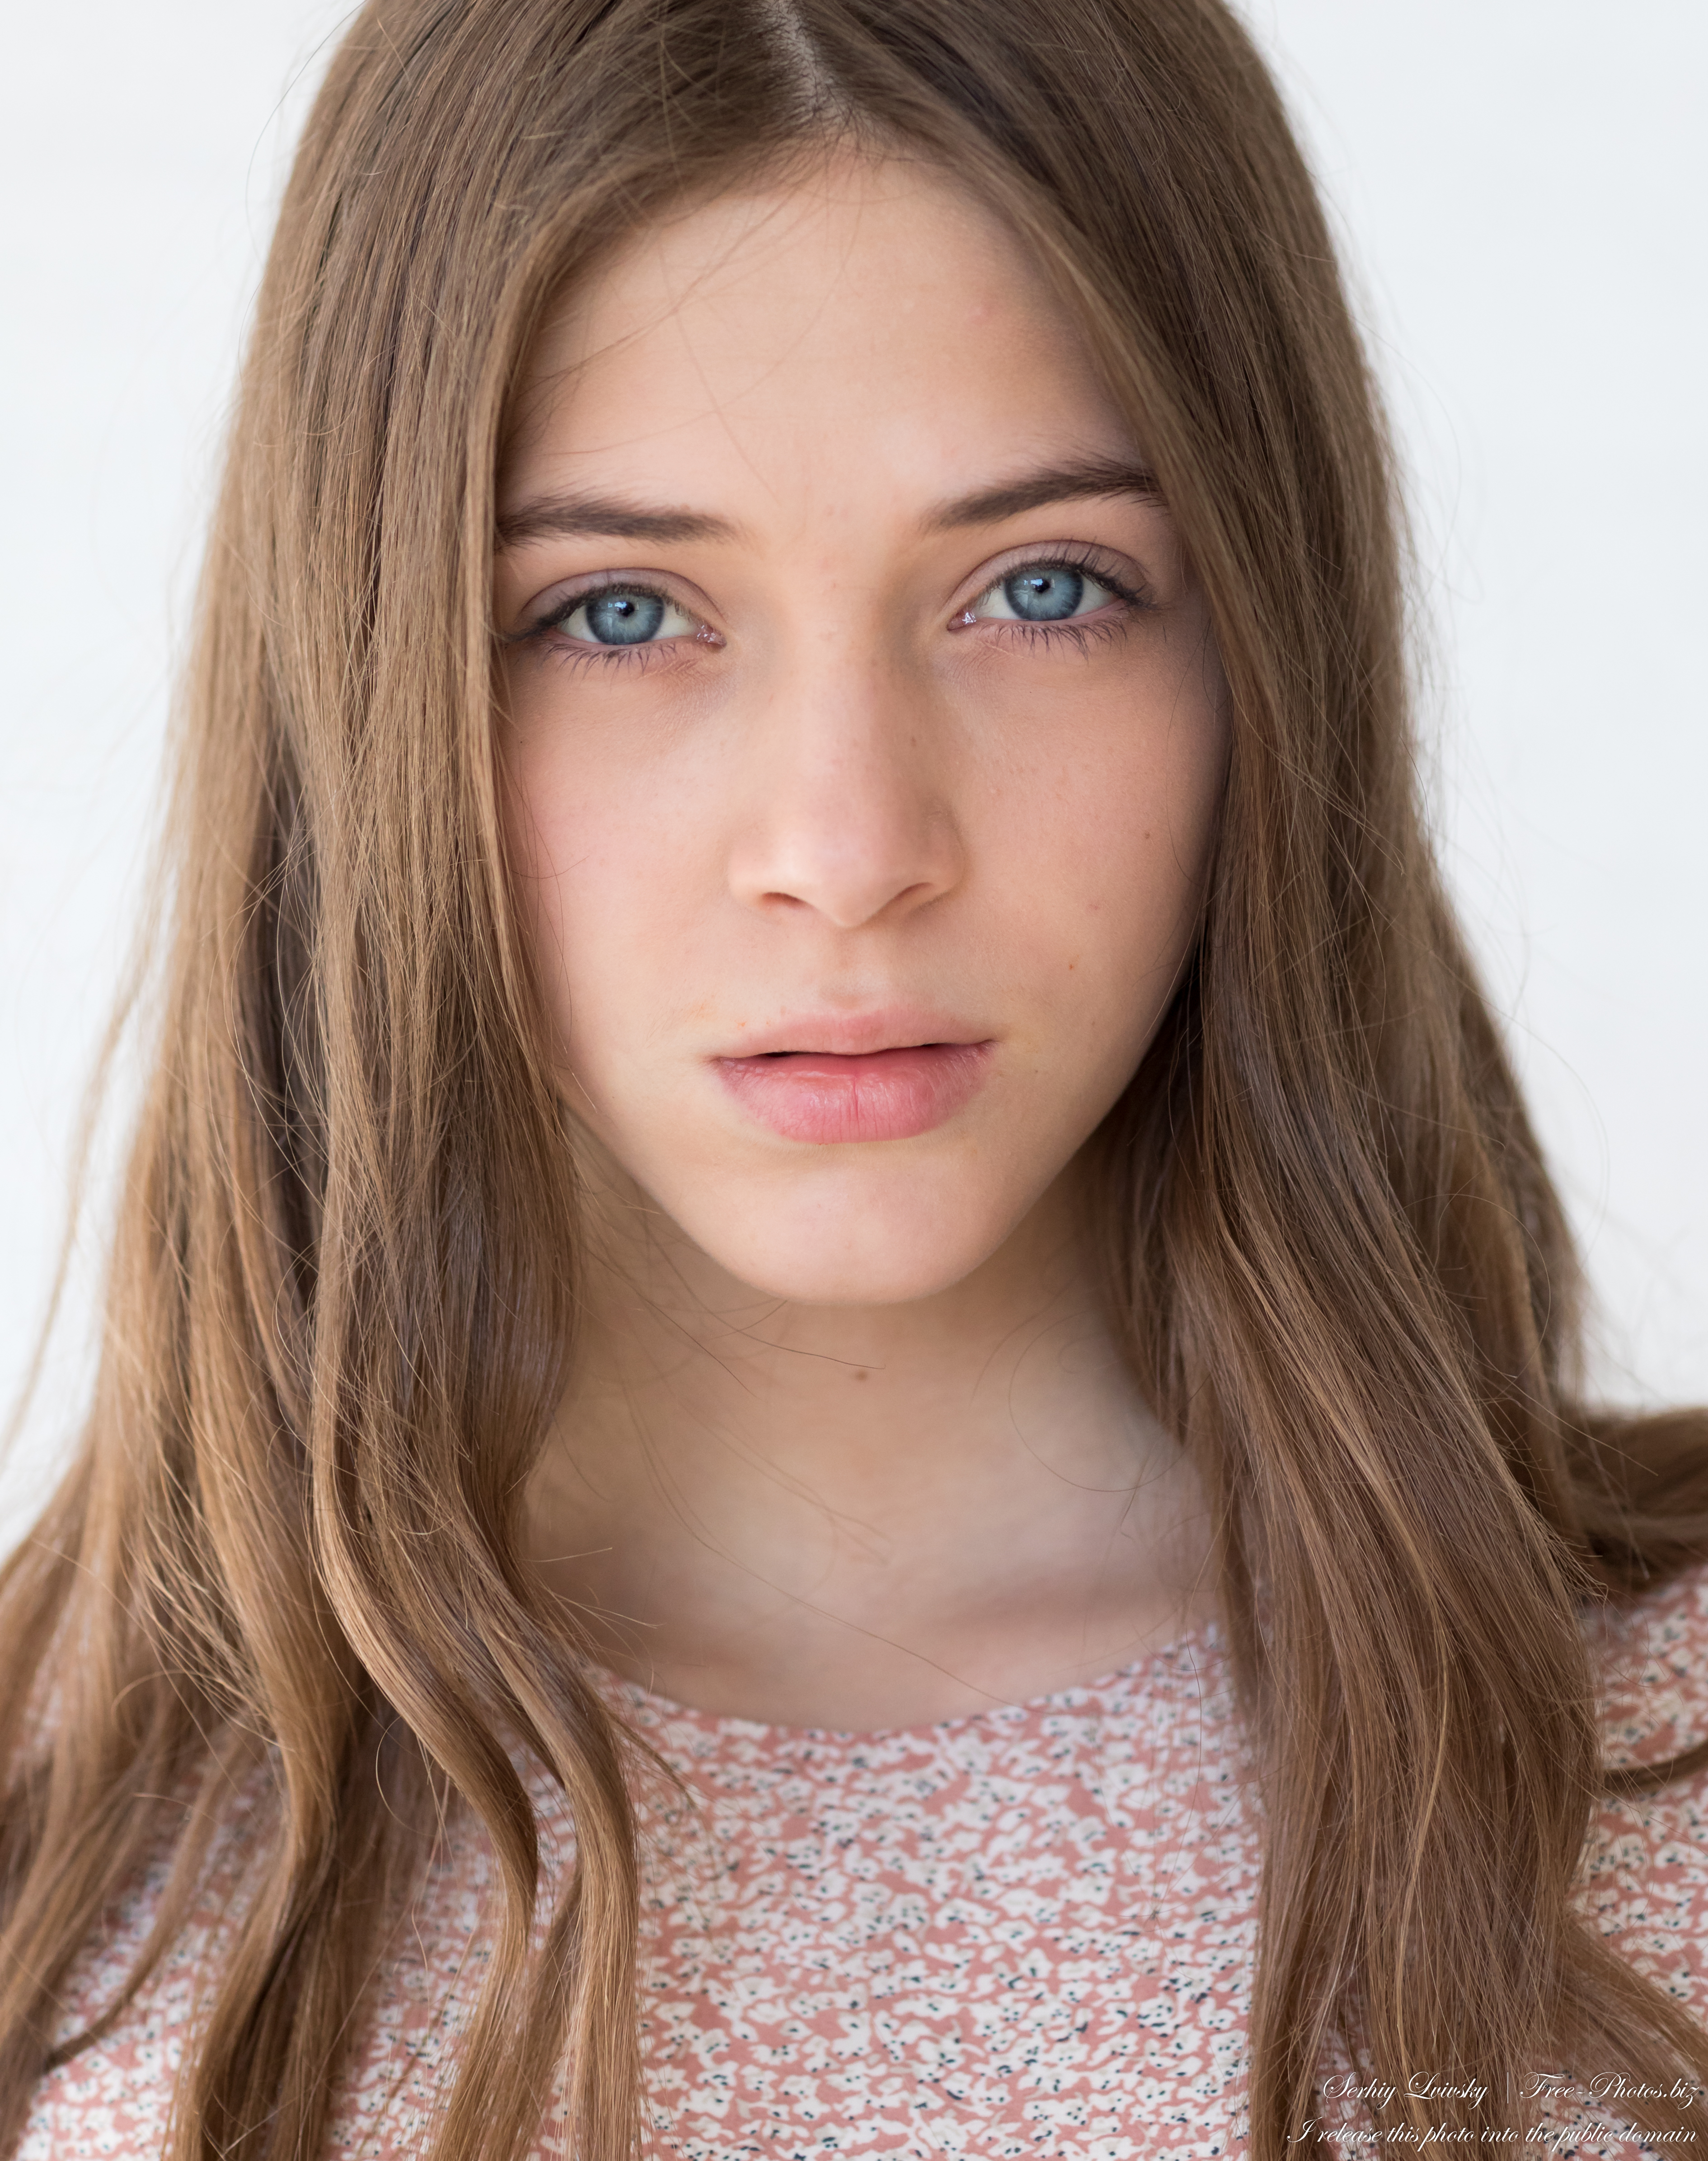 Sophia - a 17-year-old creation of God with blue eyes photographed in October 2021 by Serhiy Lvivsky, portrait 6 out of 27